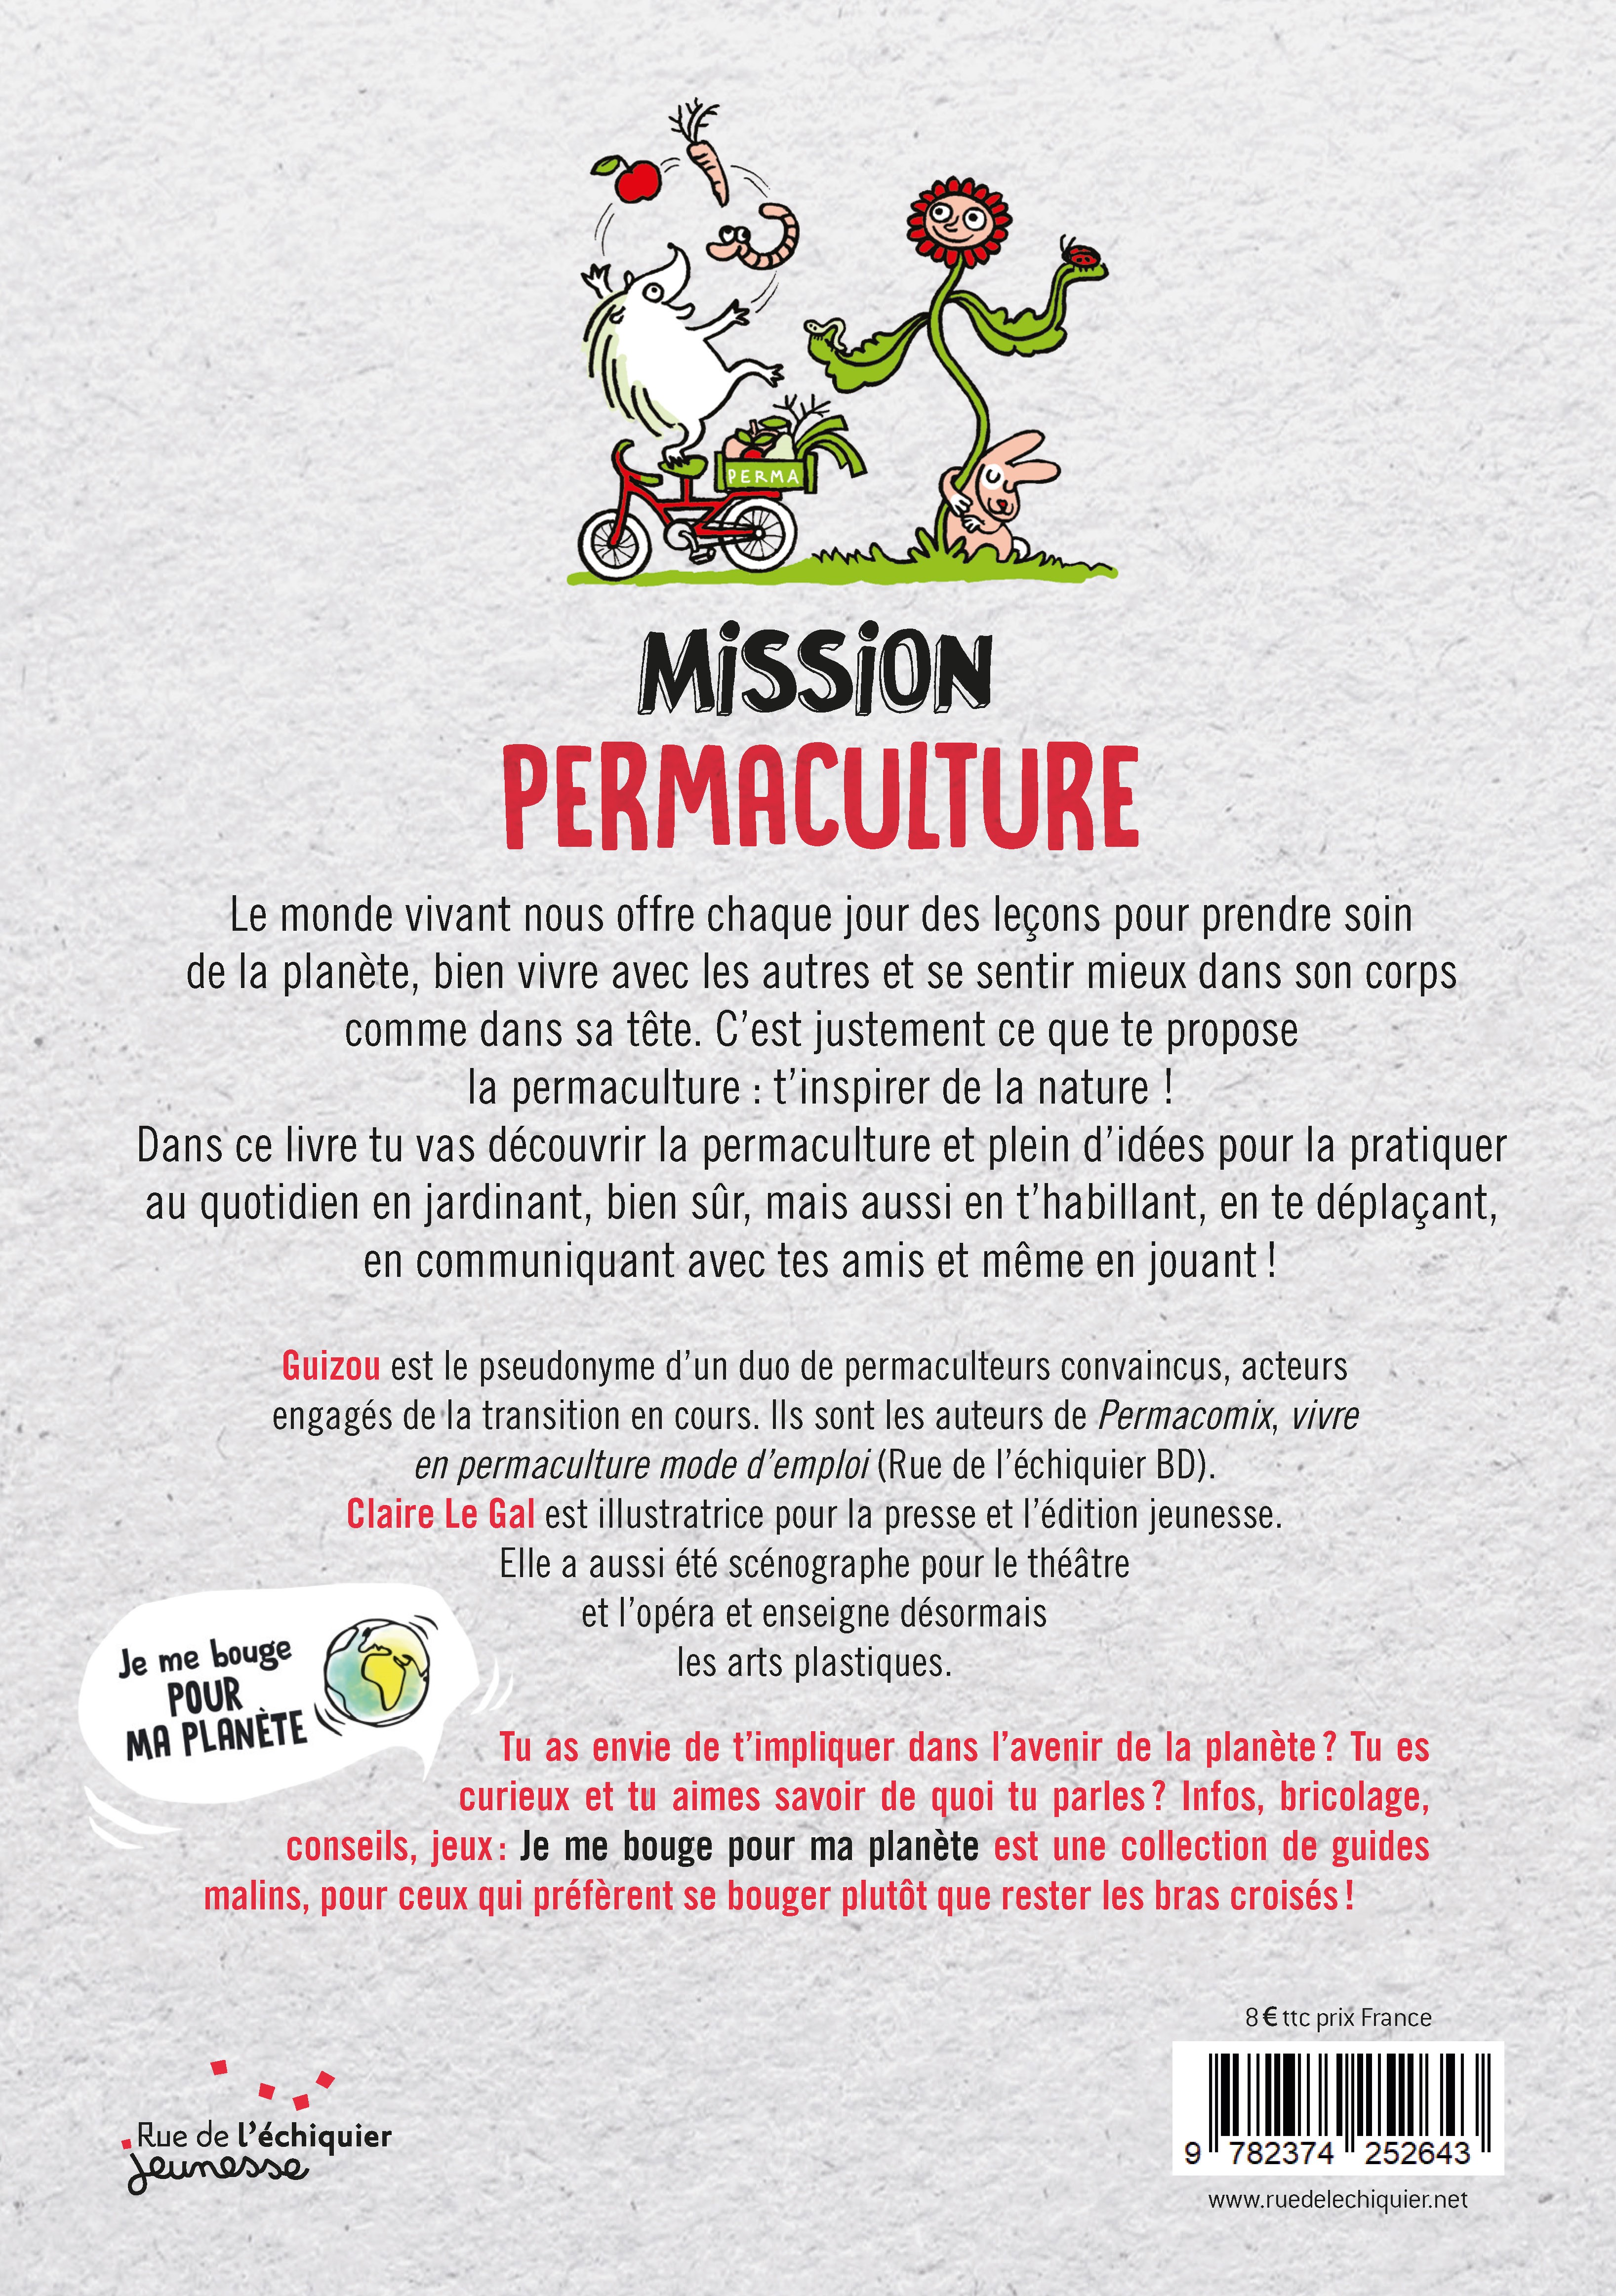 MISSION PERMACULTURE